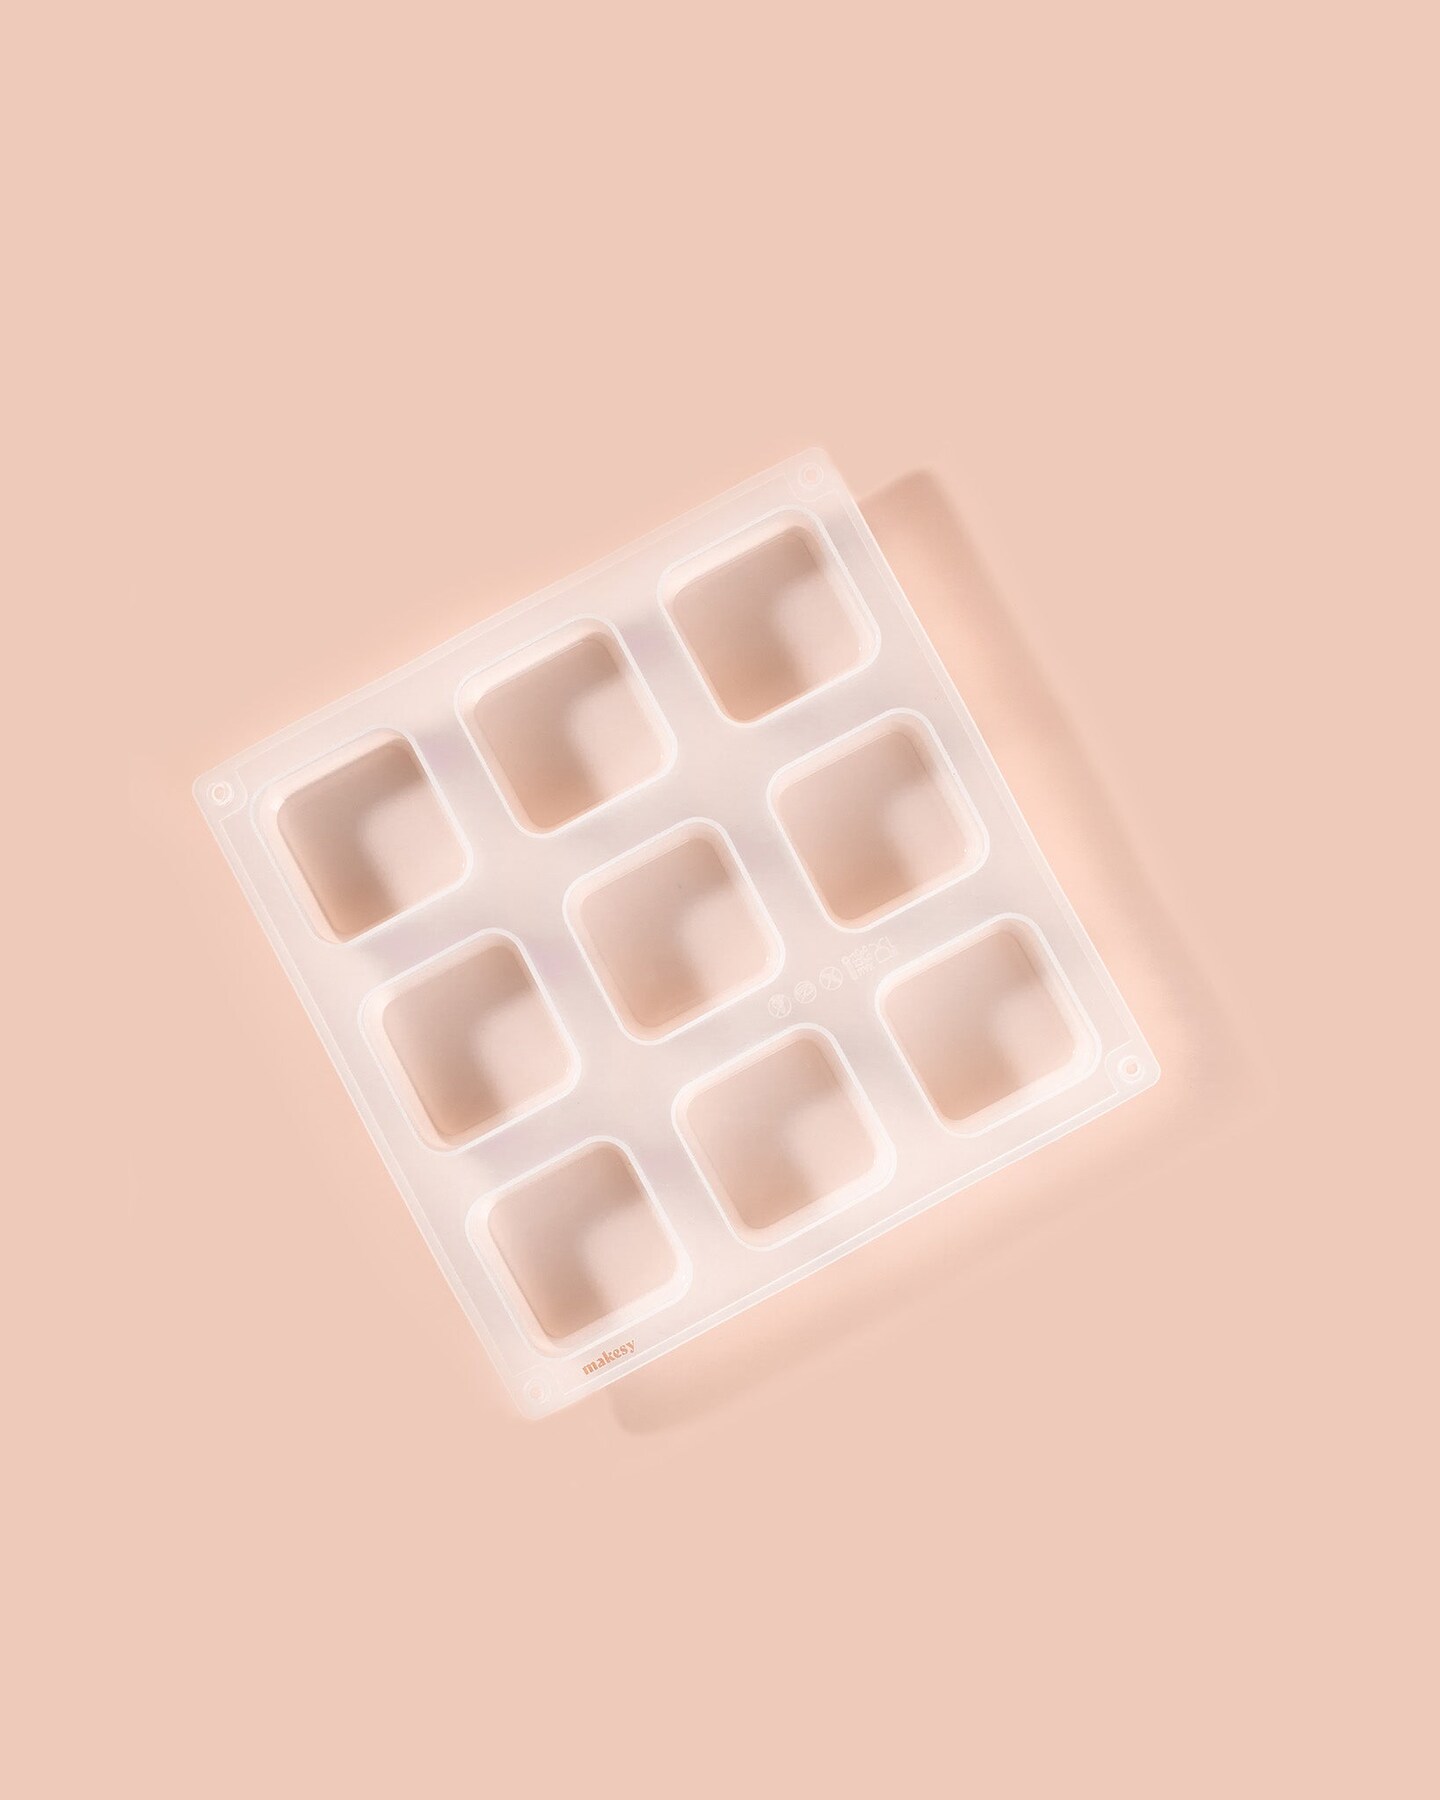 Silicone Square Mold, 9 Cavity for Soaps, Wax Melts or Tarts